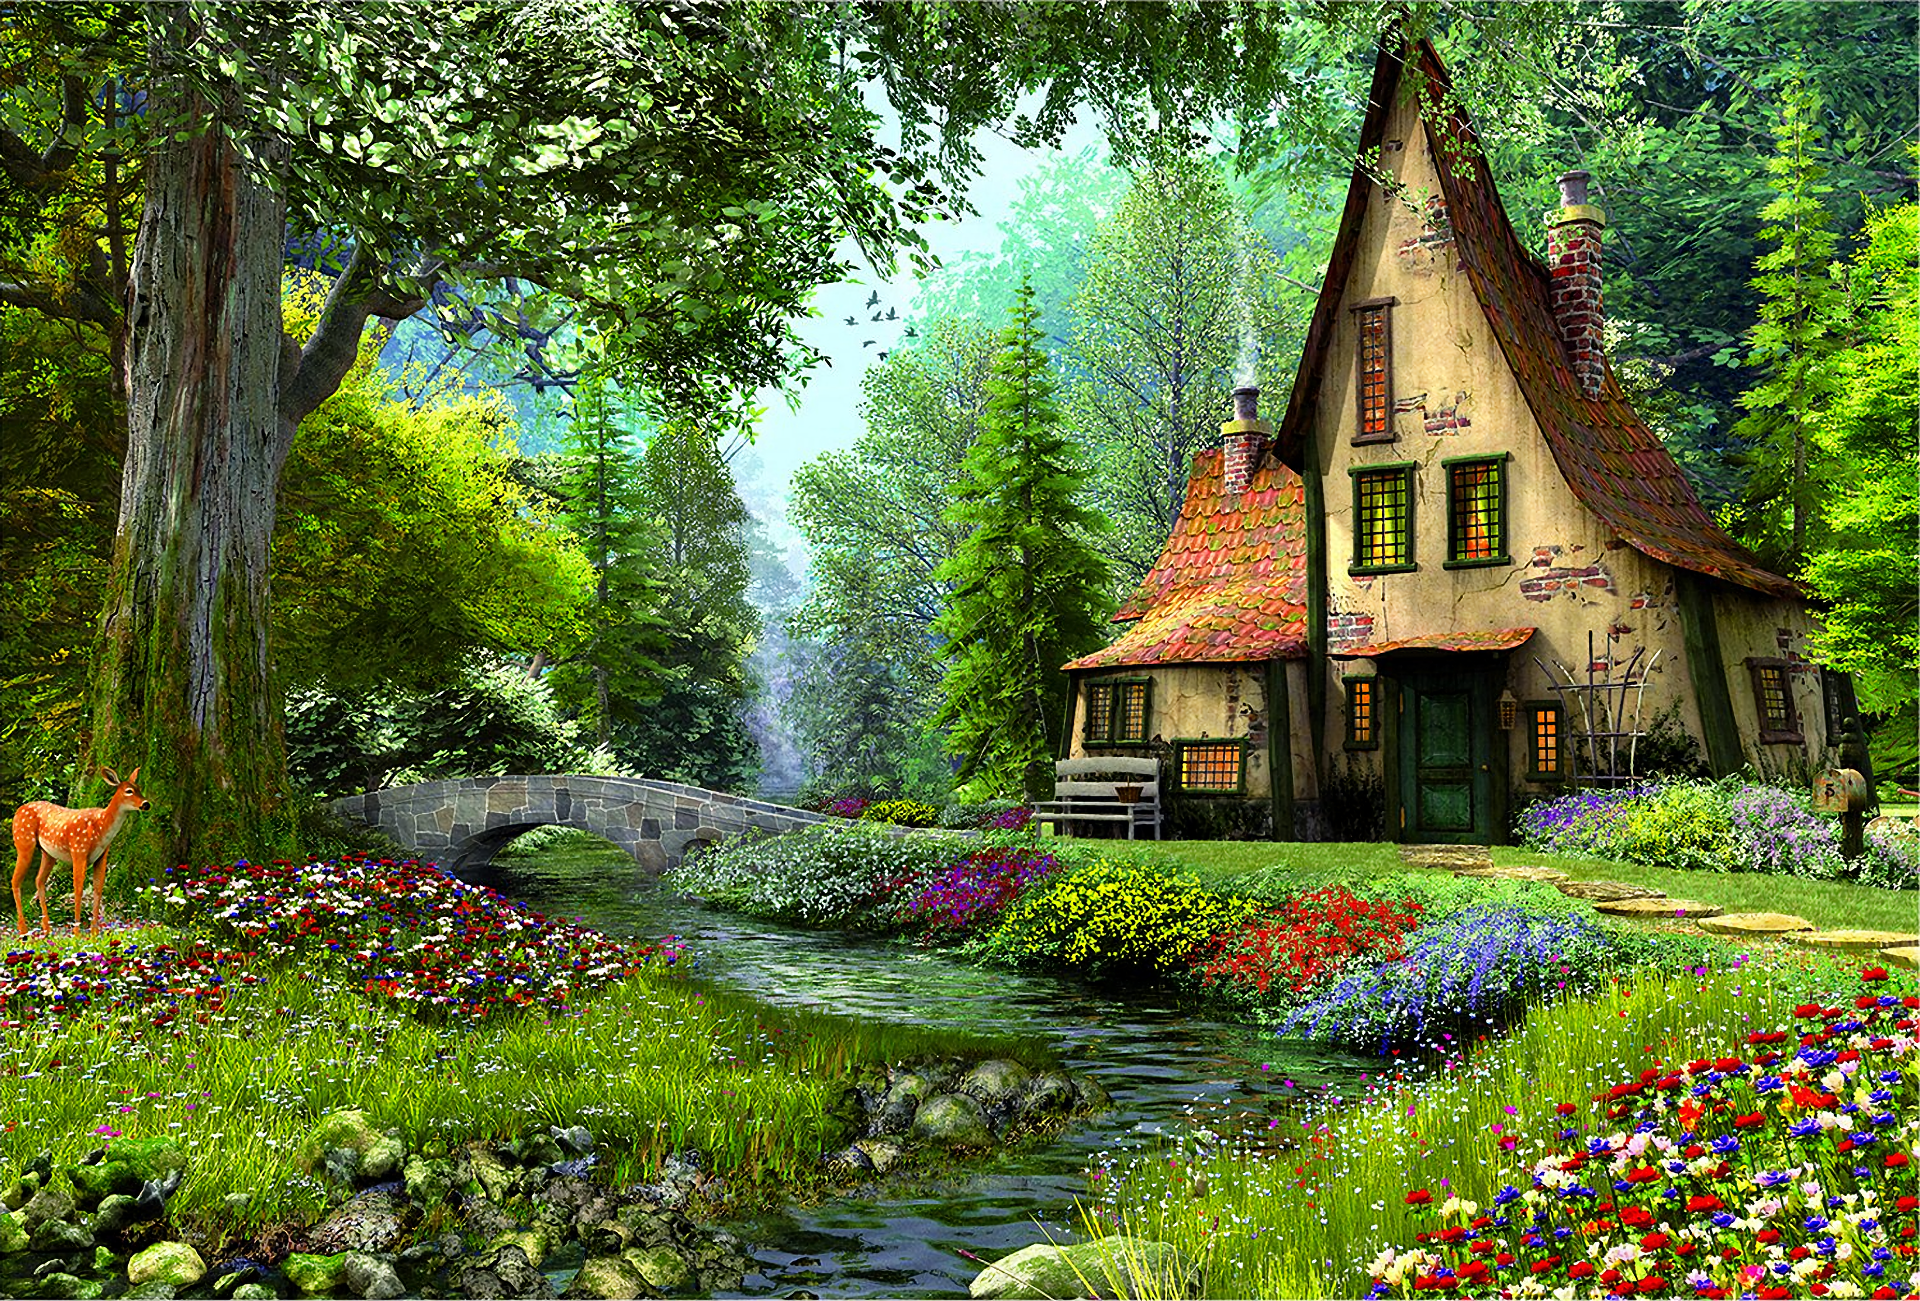 Magical Fairy Landscapes Wallpapers